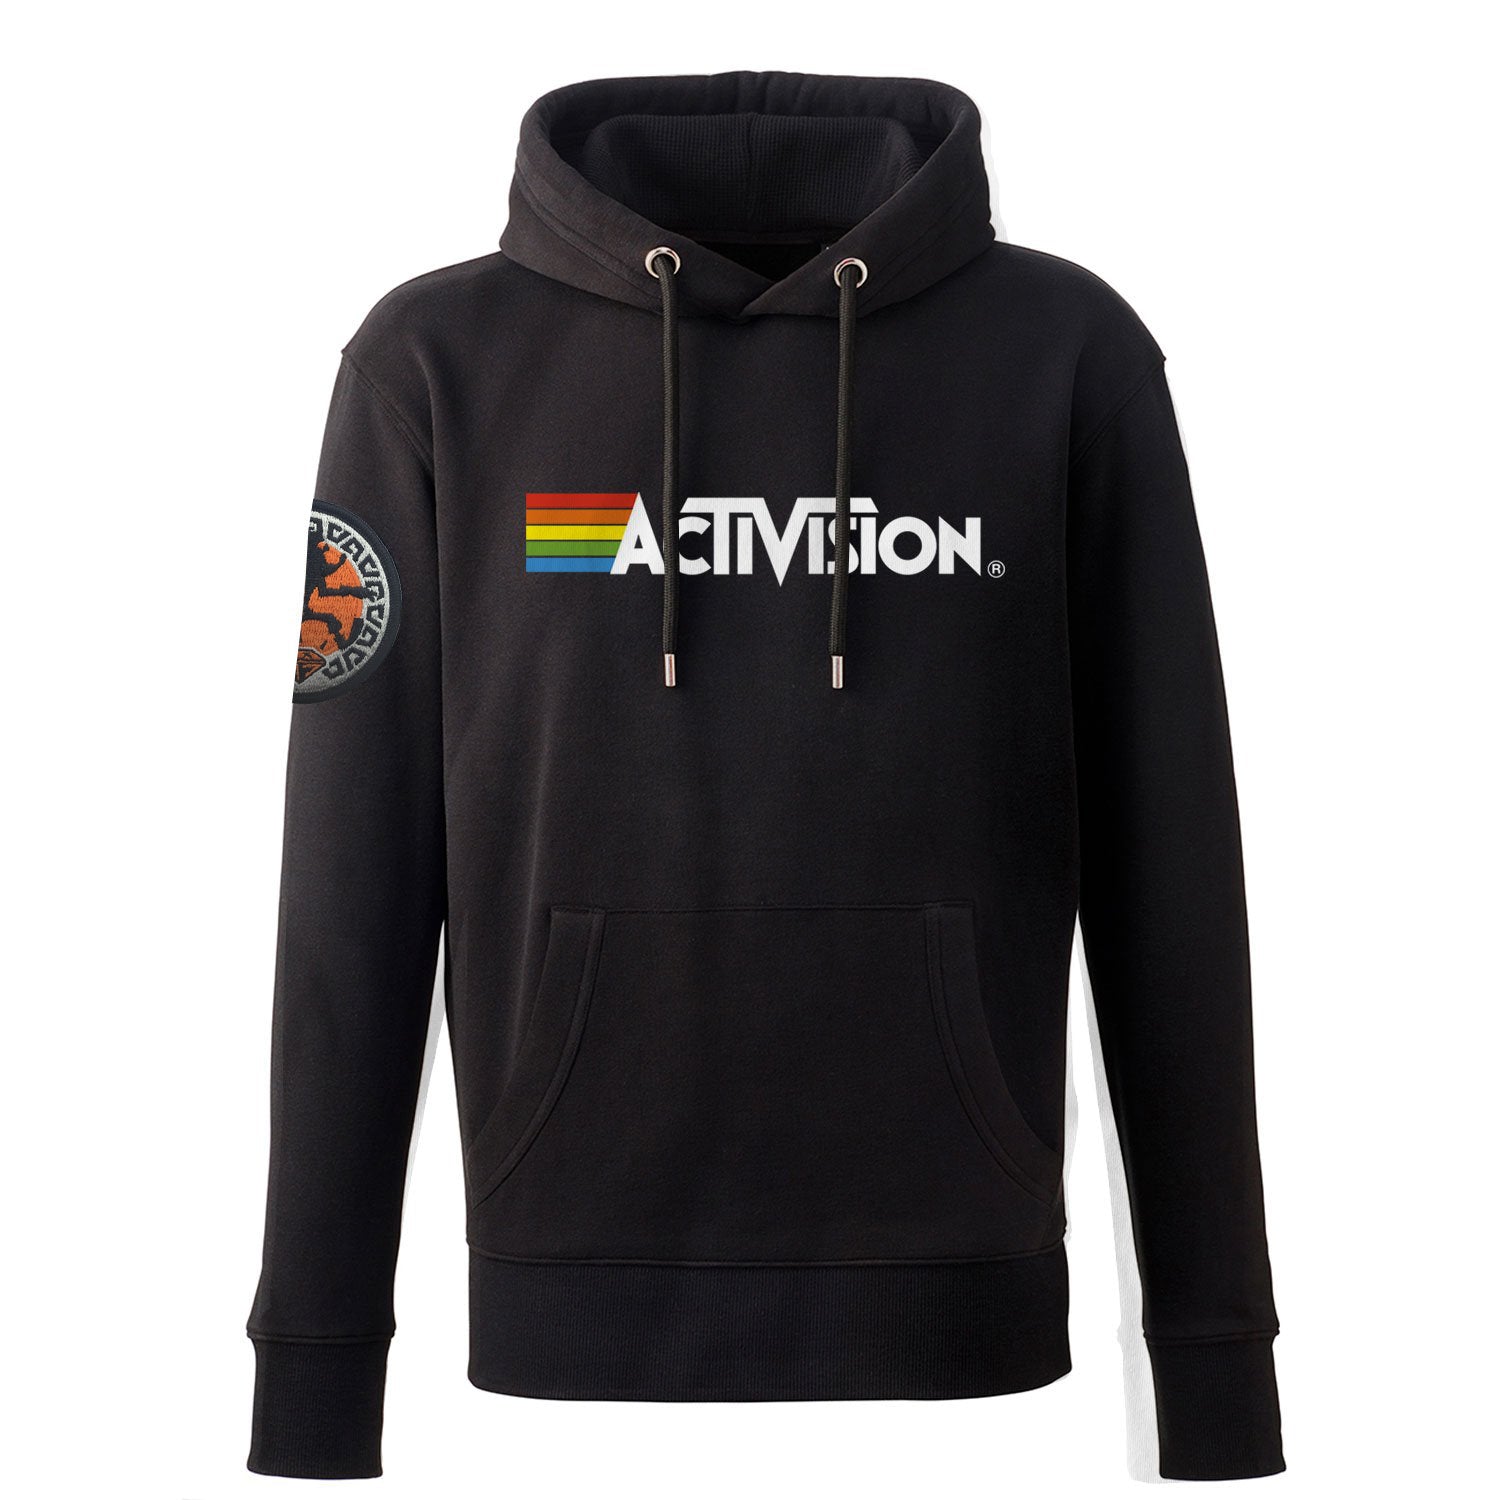 Crash Bandicoot Silo Patch, Activision Logo Men's Hoody, Black Pullover in Unisex Fit with Kangaroo Pocket